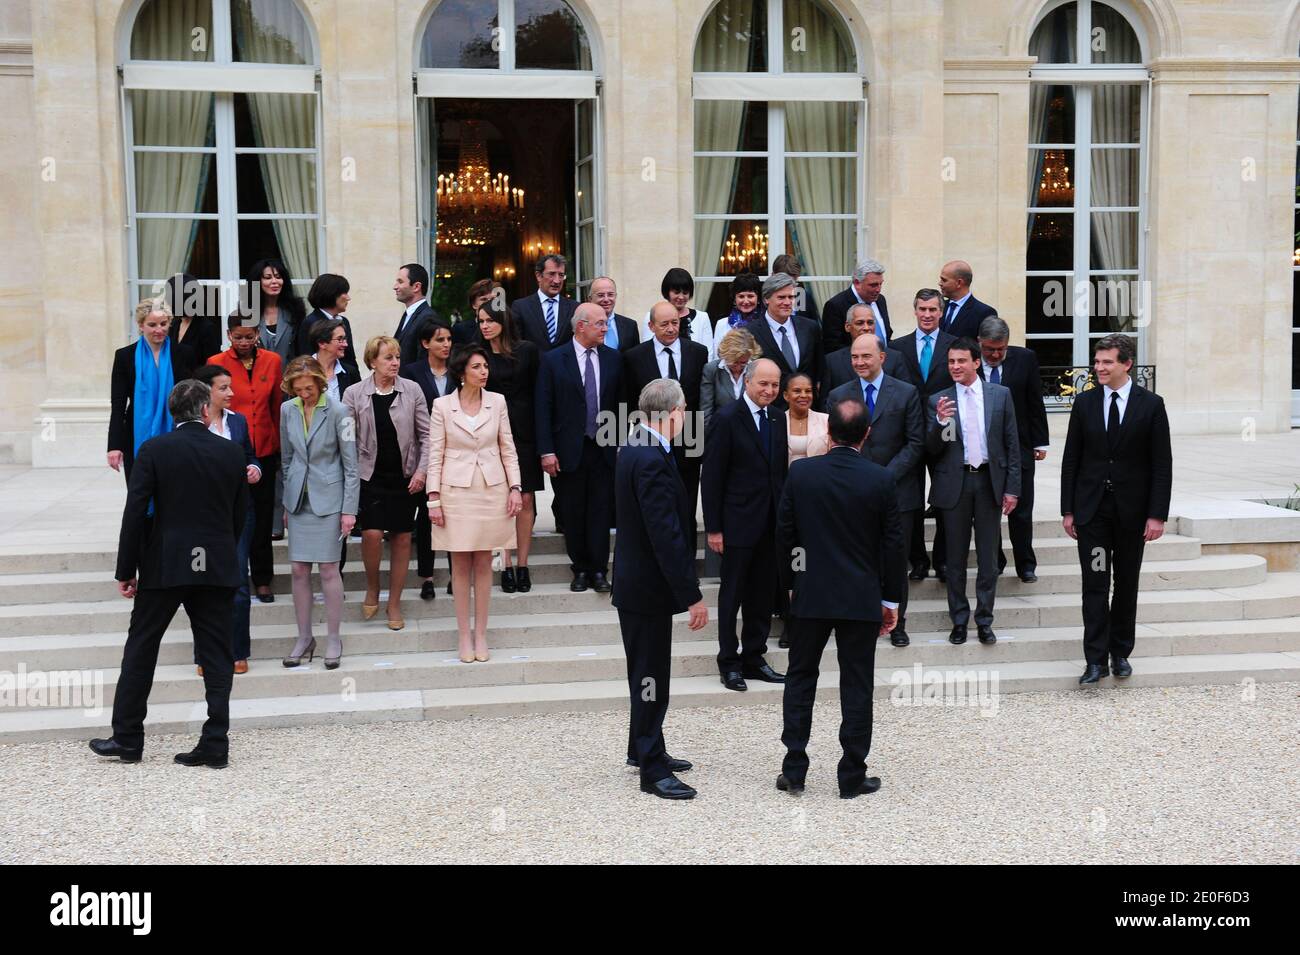 Group photograph of the new French Government taken at the Elysee Palace in Paris, France, on May 17, 2012. From top - JM for Junior Minister and M for Minister (1st row, LtoR) JM for SMEs, Innovations and Digital Economy, Fleur Pellerin; JM for French Living Abroad and Francophony, Yamina Benguigui; JM for Disabled People, Marie-Arlette Carlotti; JM for Social and Solidarity Economy, Benoit Hamon; JM for the Elderly and Disabled, Michele Delaunay; JM for Cities Francois Lamy; JM for European Affairs Bernard Cazeneuve; JM for Handicraft, Tourism and Trade, Sylvia Pinel; JM for Family Dominique Stock Photo